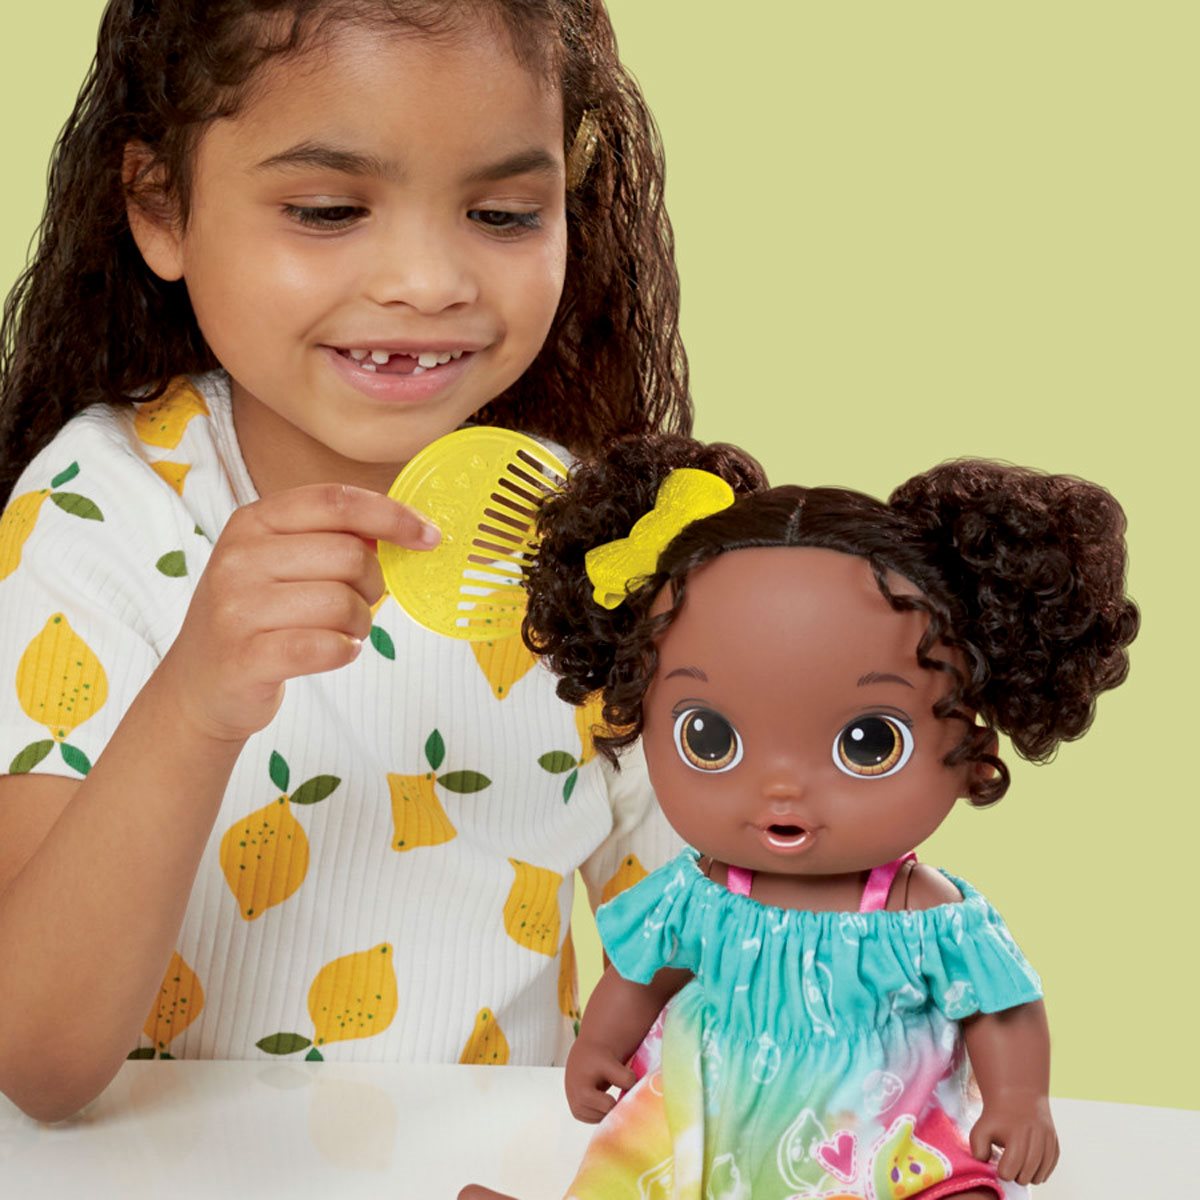 Baby Alive Sunshine Snacks - with Summer-Themed Doll Accessories - Black  Hair